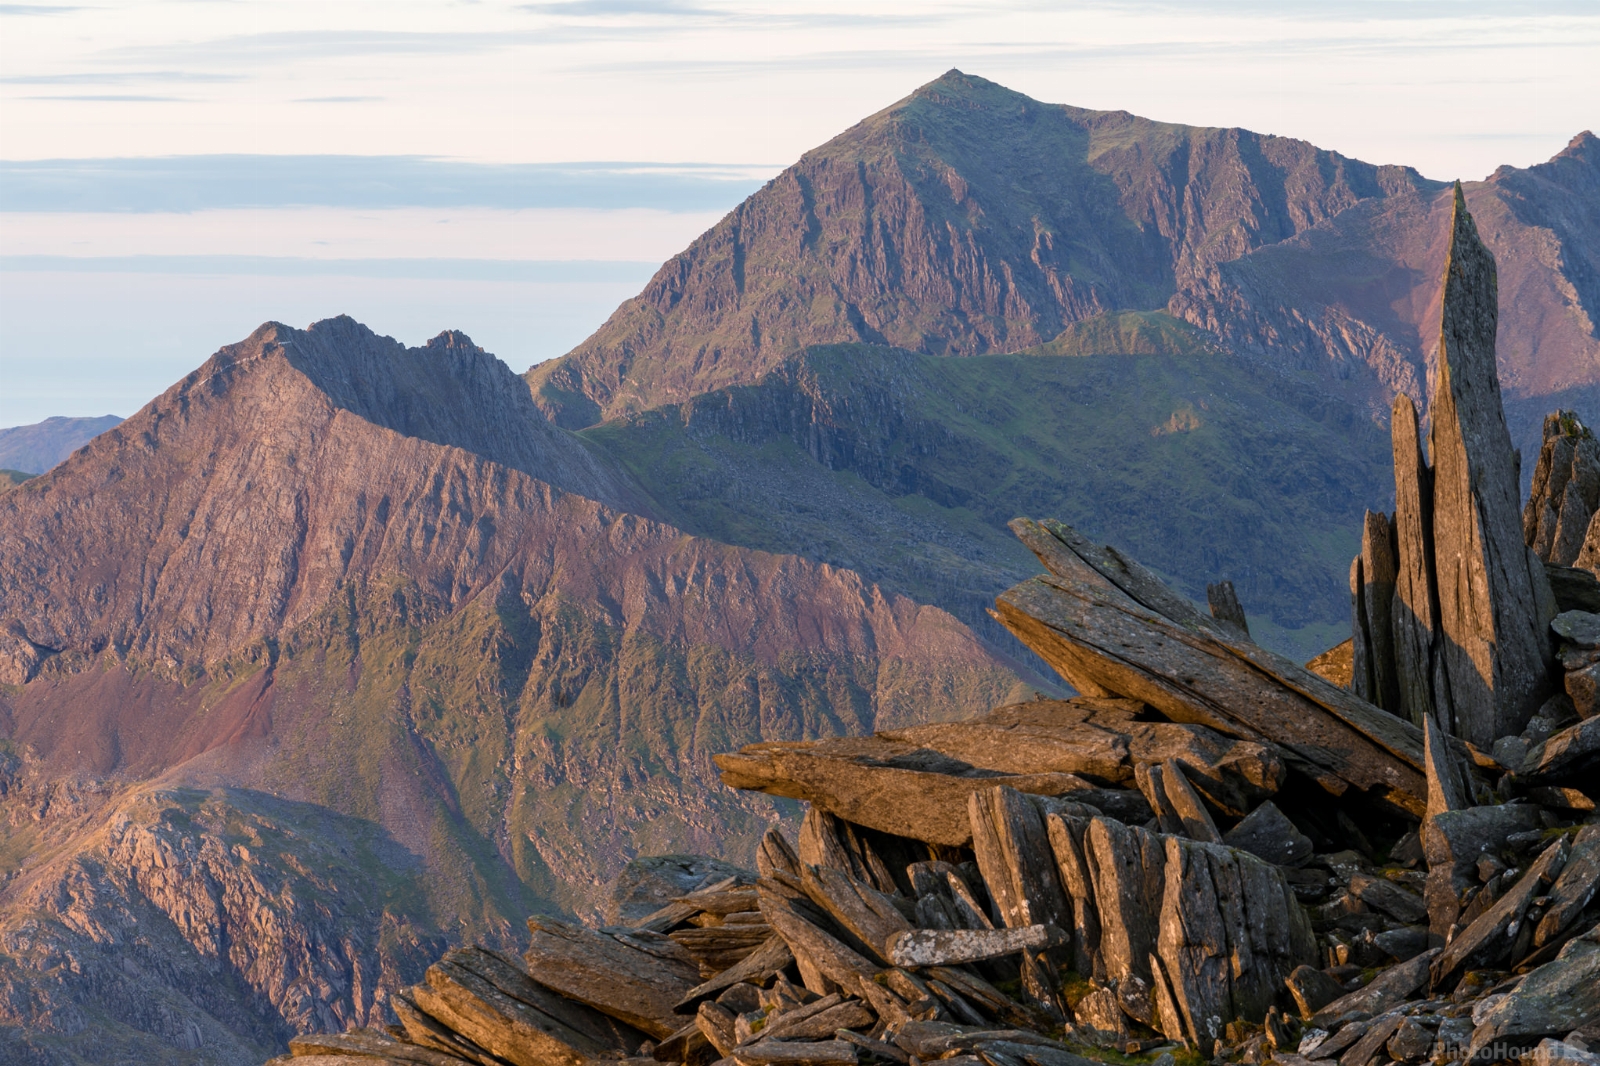 Image of Castle of the Winds / Castell Y Gwynt by James Grant